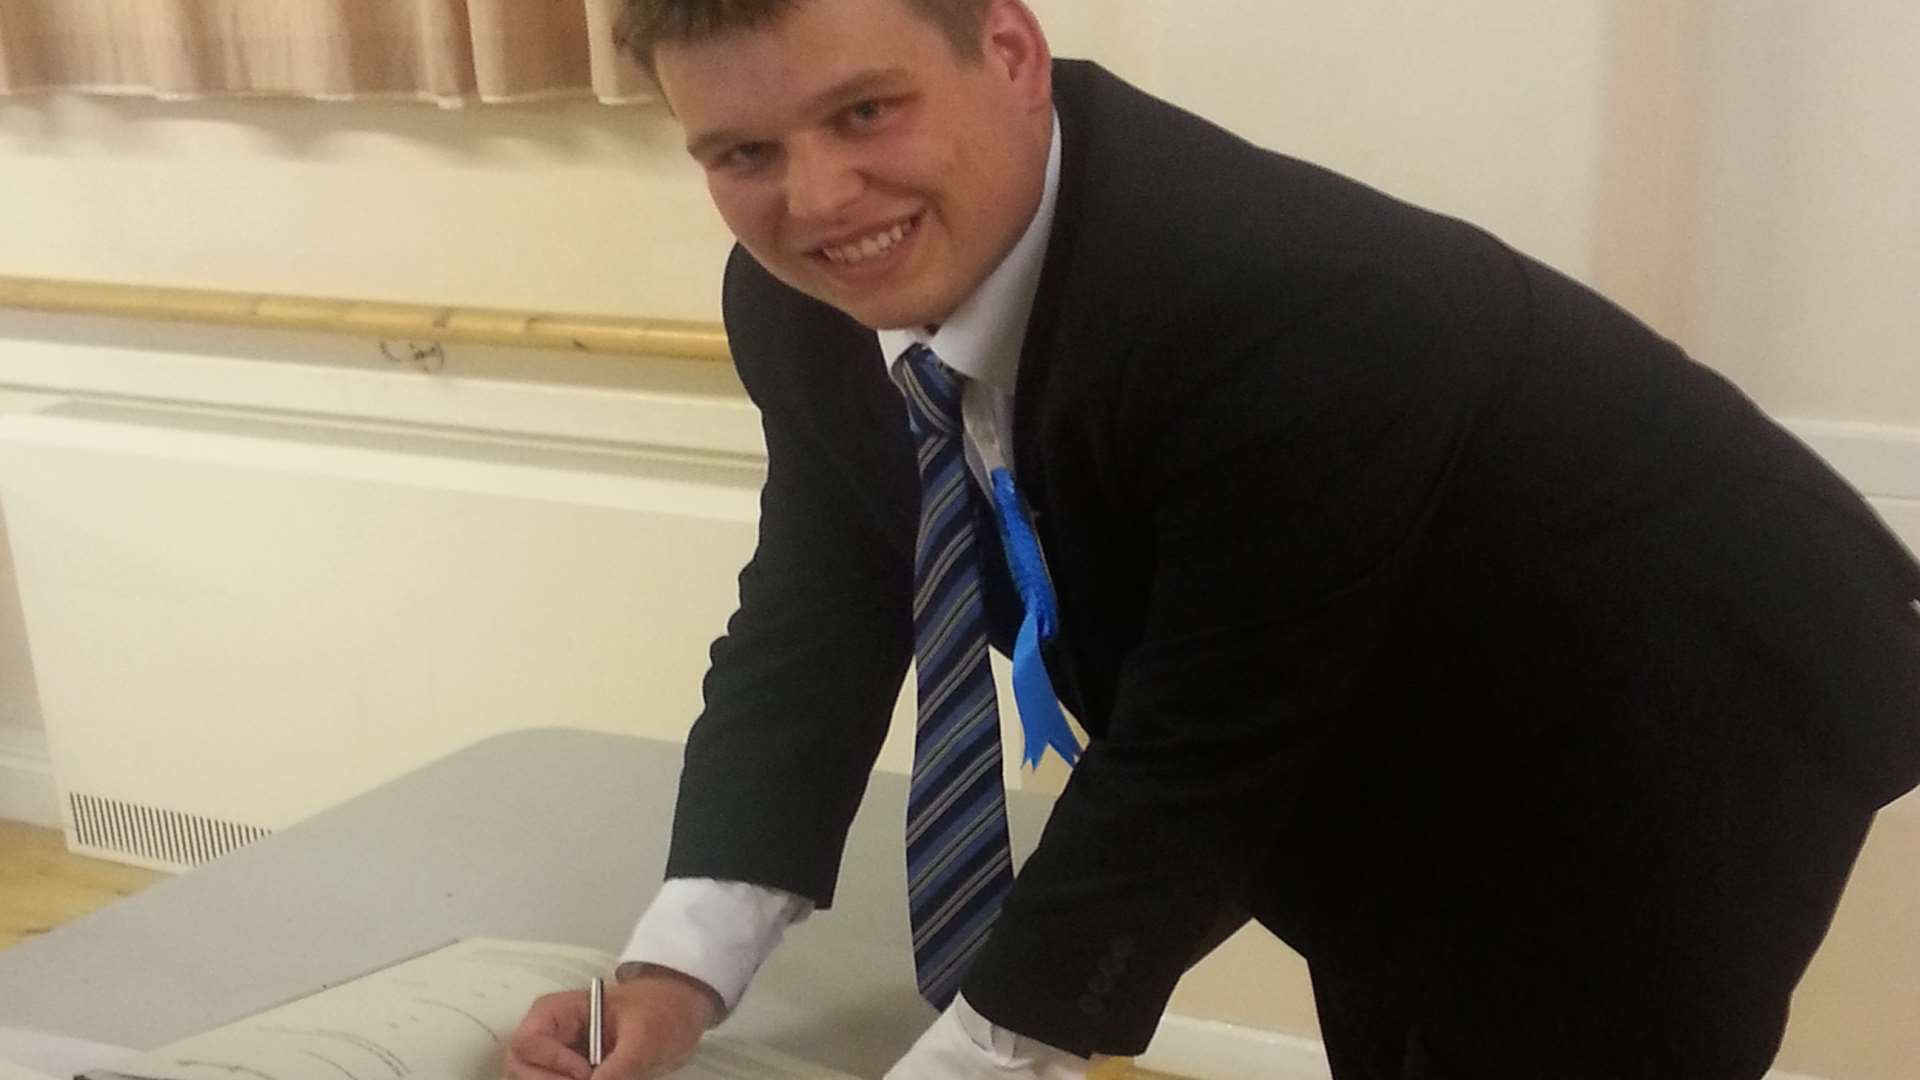 Cllr Boughton signs his acceptance papers